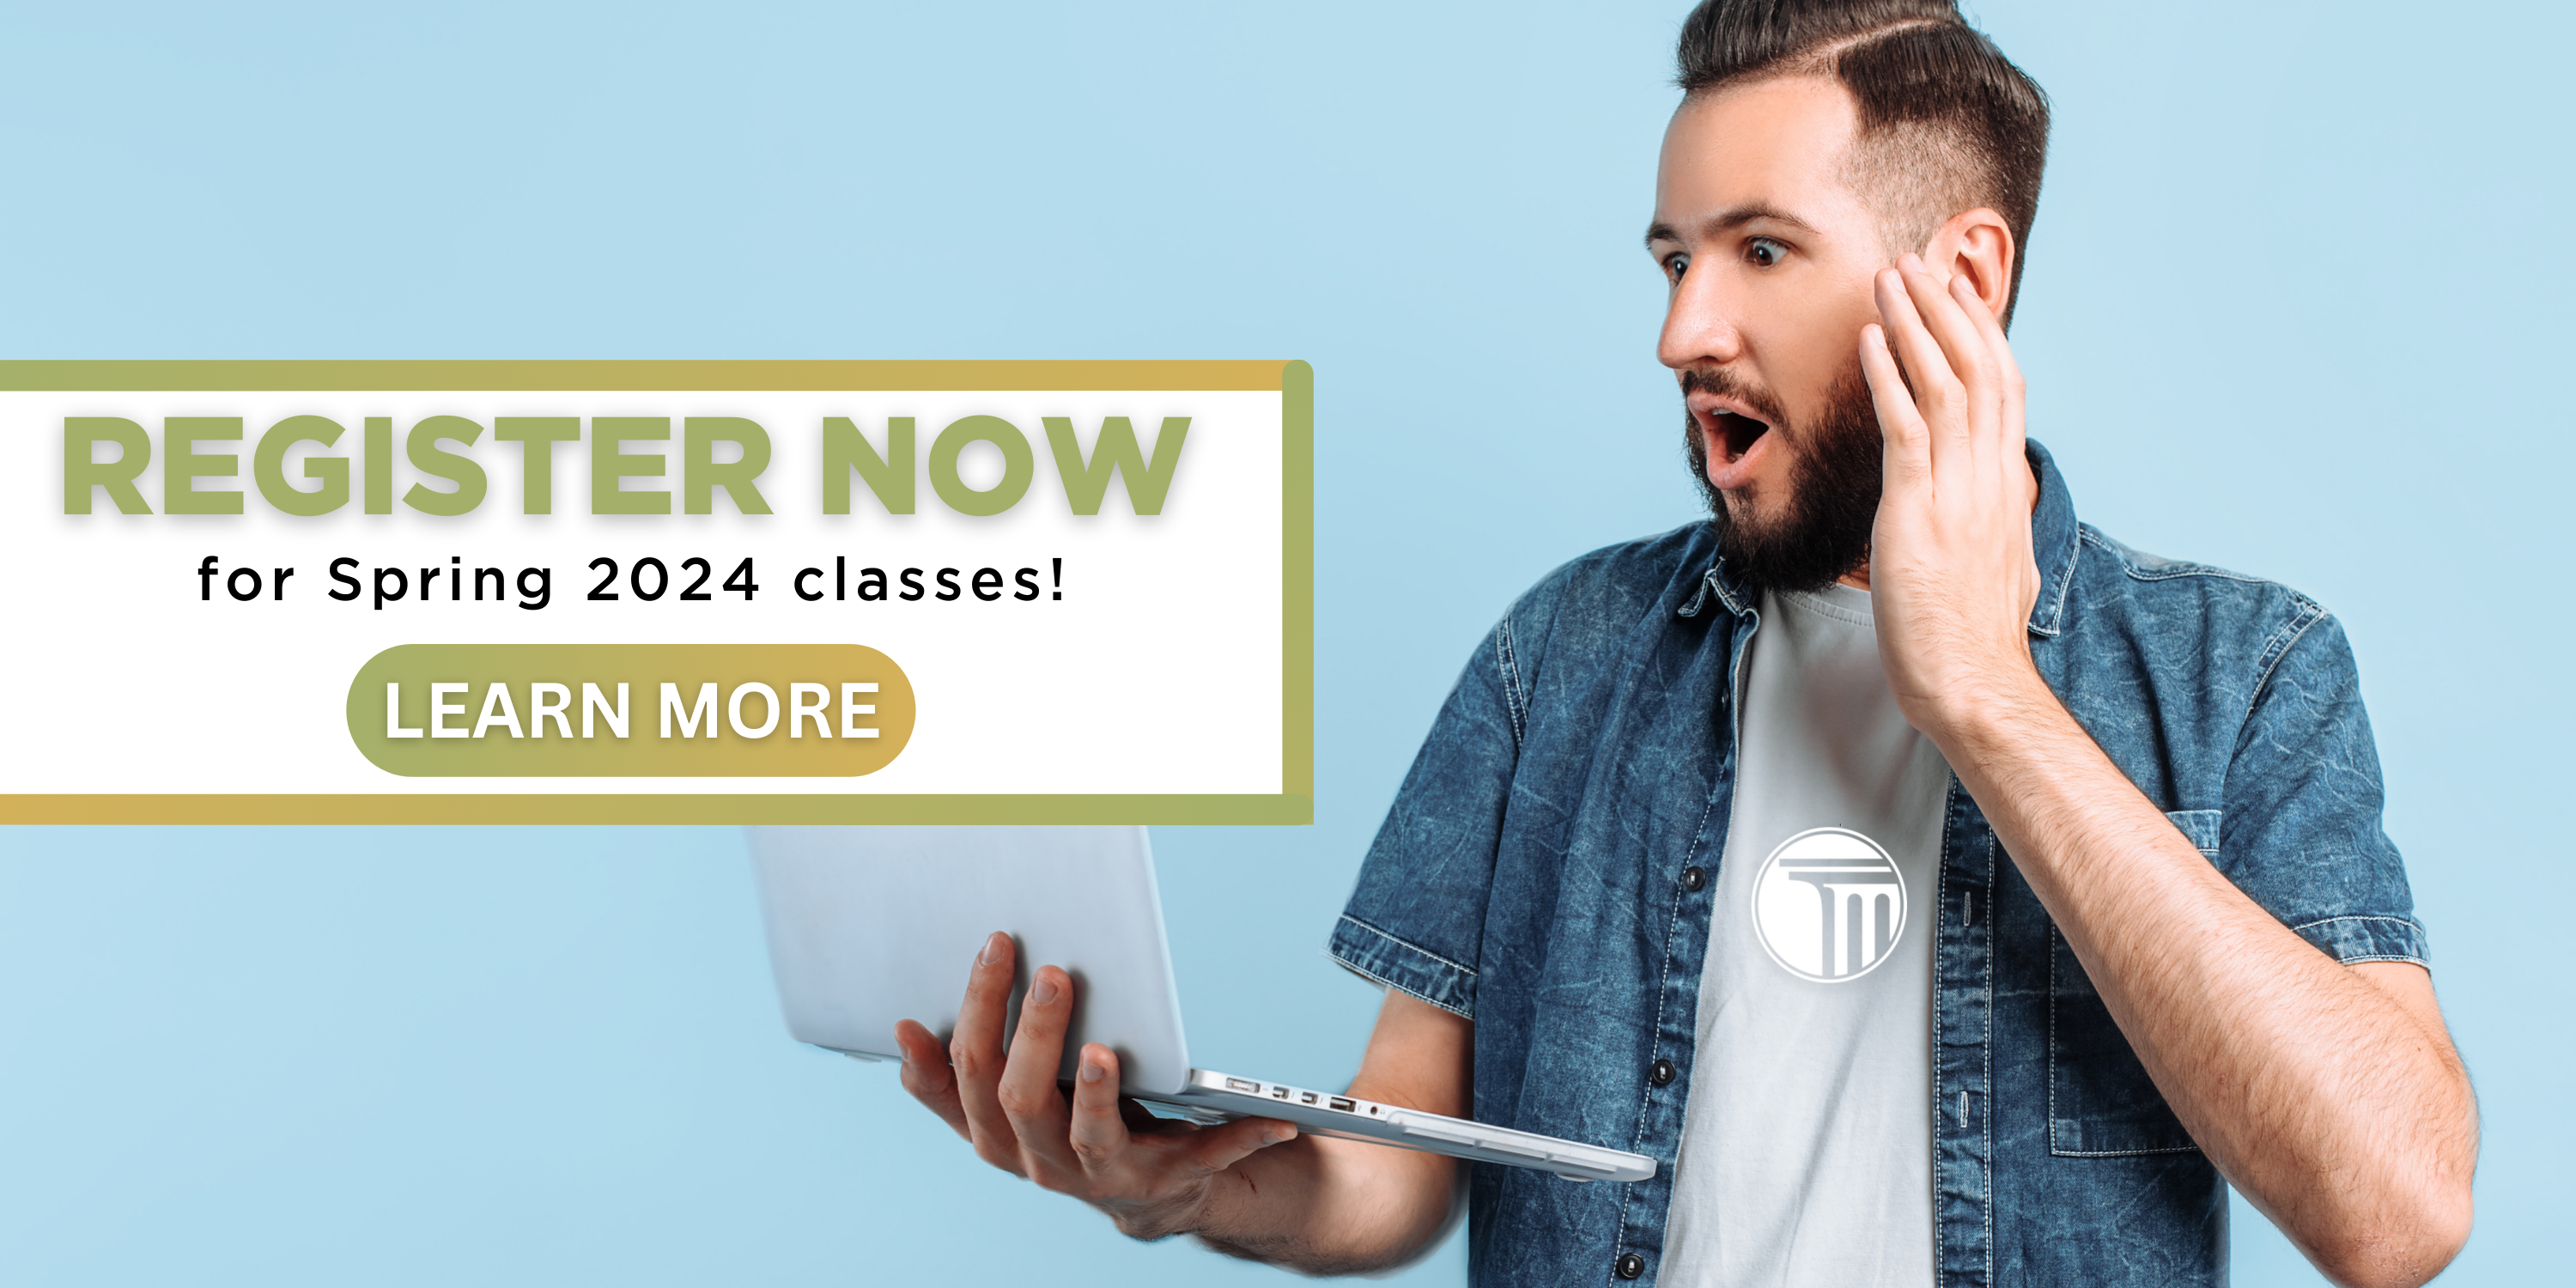 Banner that reads "Register now for Spring 2024 classes!". Click the banner to go to the MyMitchell page.